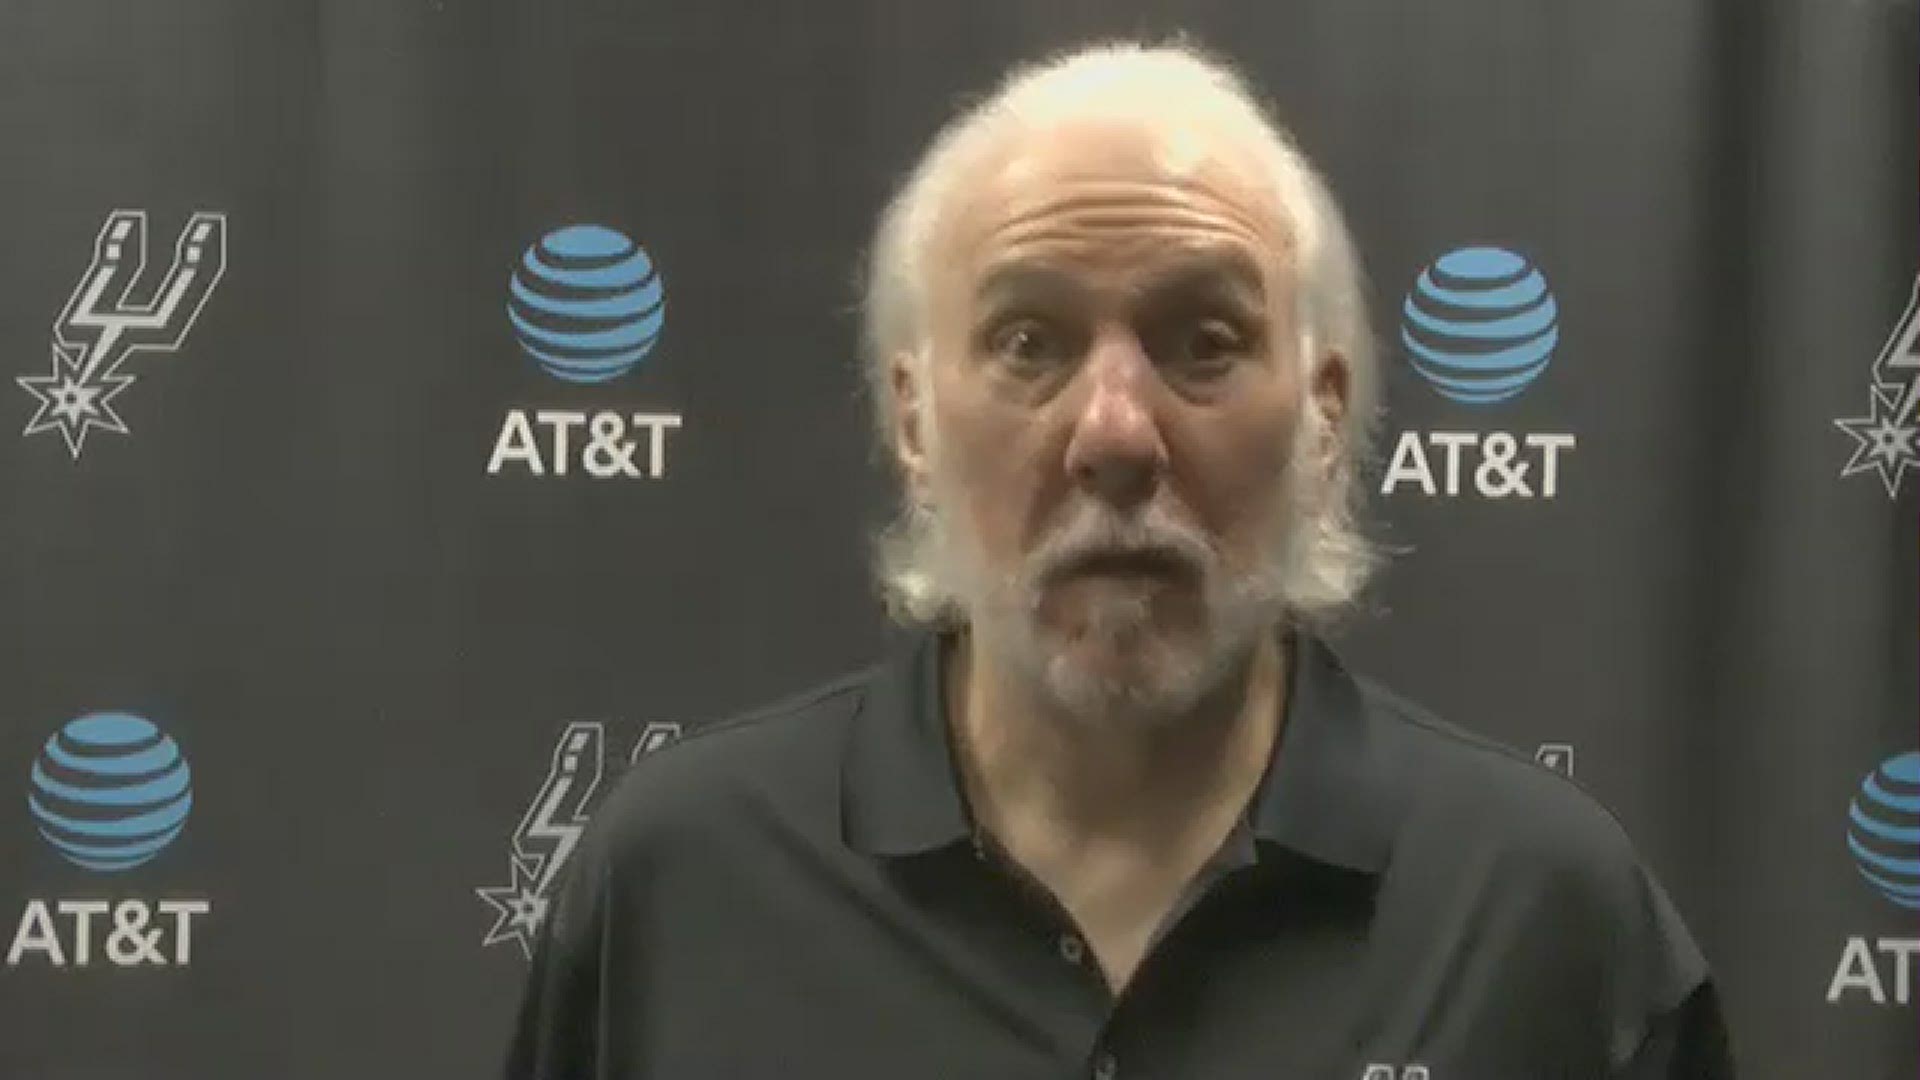 Popovich said that White wouldn't play back-to-back games, ruling him out for Tuesday's game against the Dubs. He expects Walker back for that one.